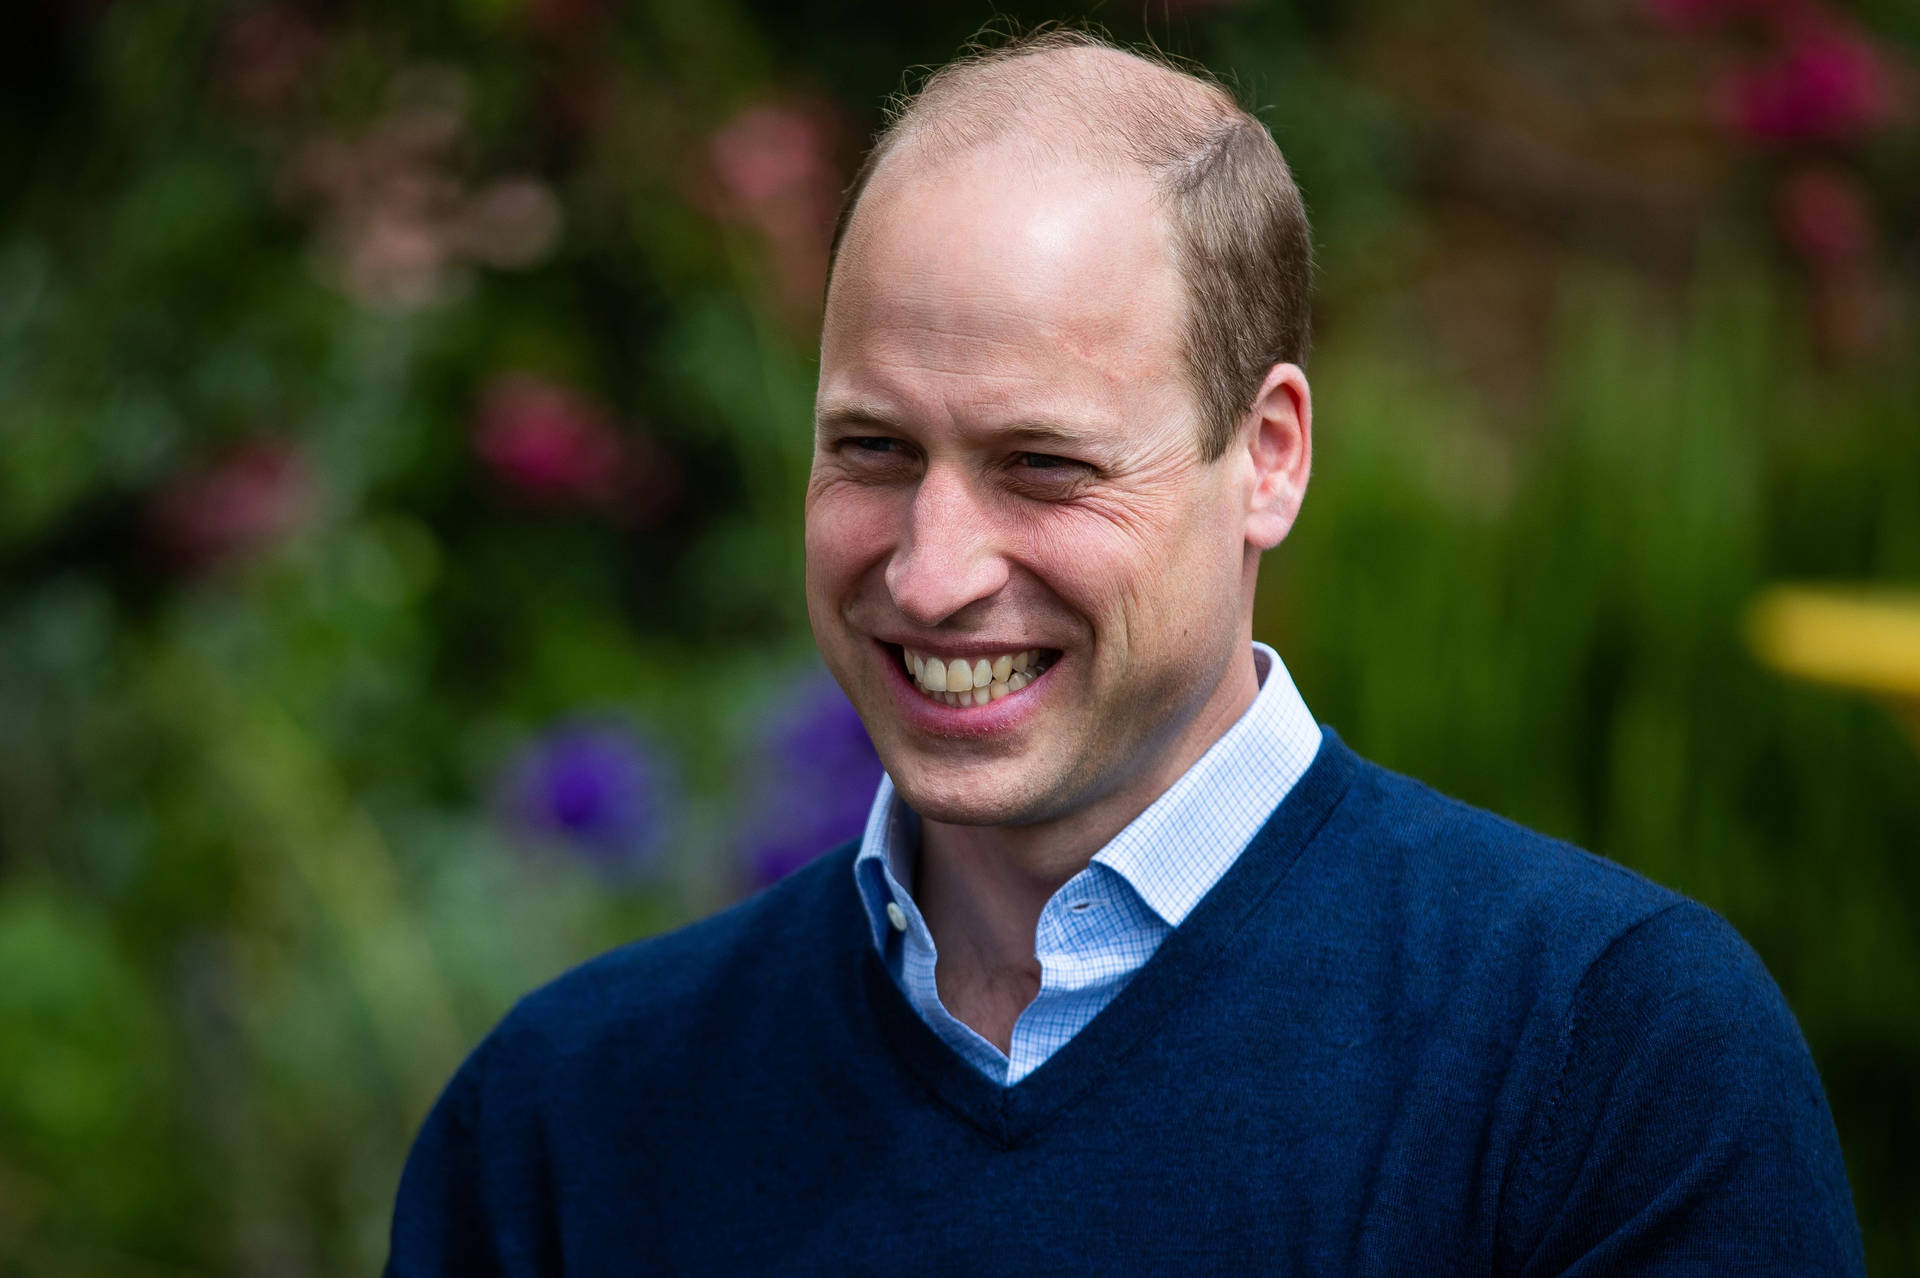 Prince William Displaying A Charming Smile